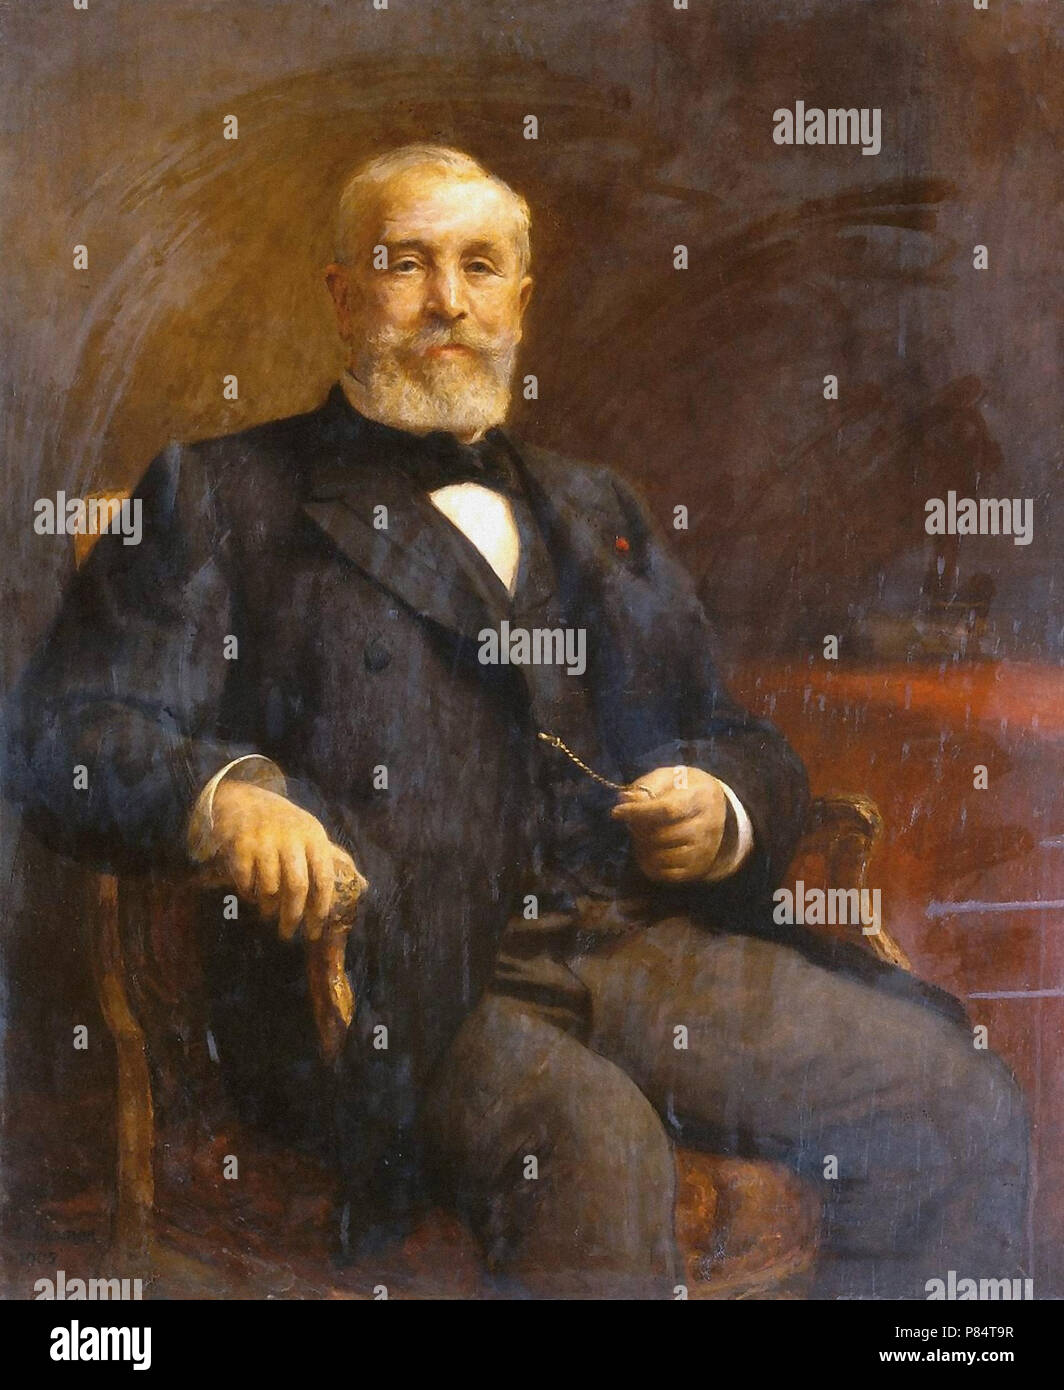 Emile Loubet (1838-1929). President of the French Republic during the Third  Republic. Portrait by Albert